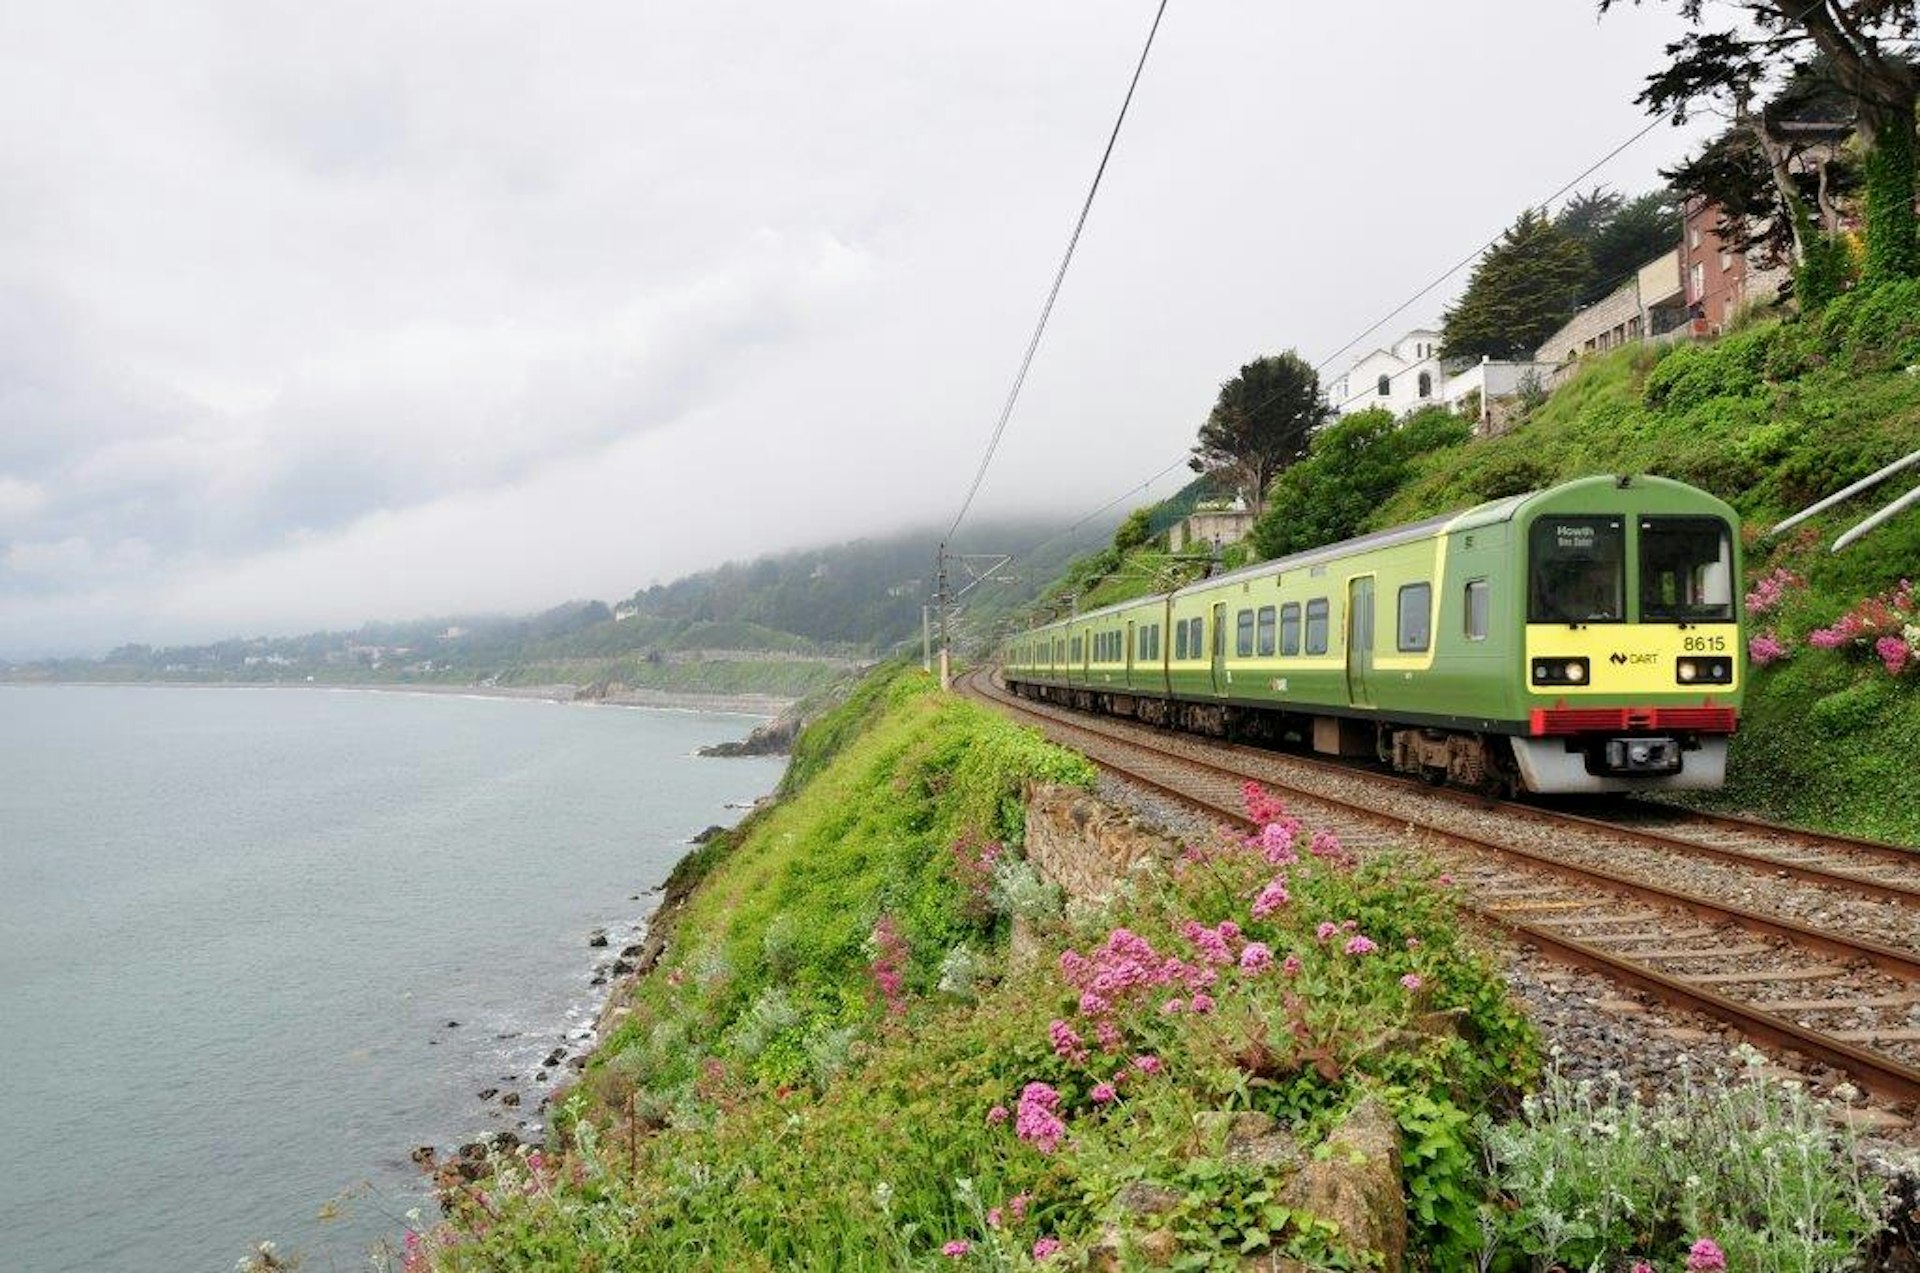 A train follows a scenic routes by the sea